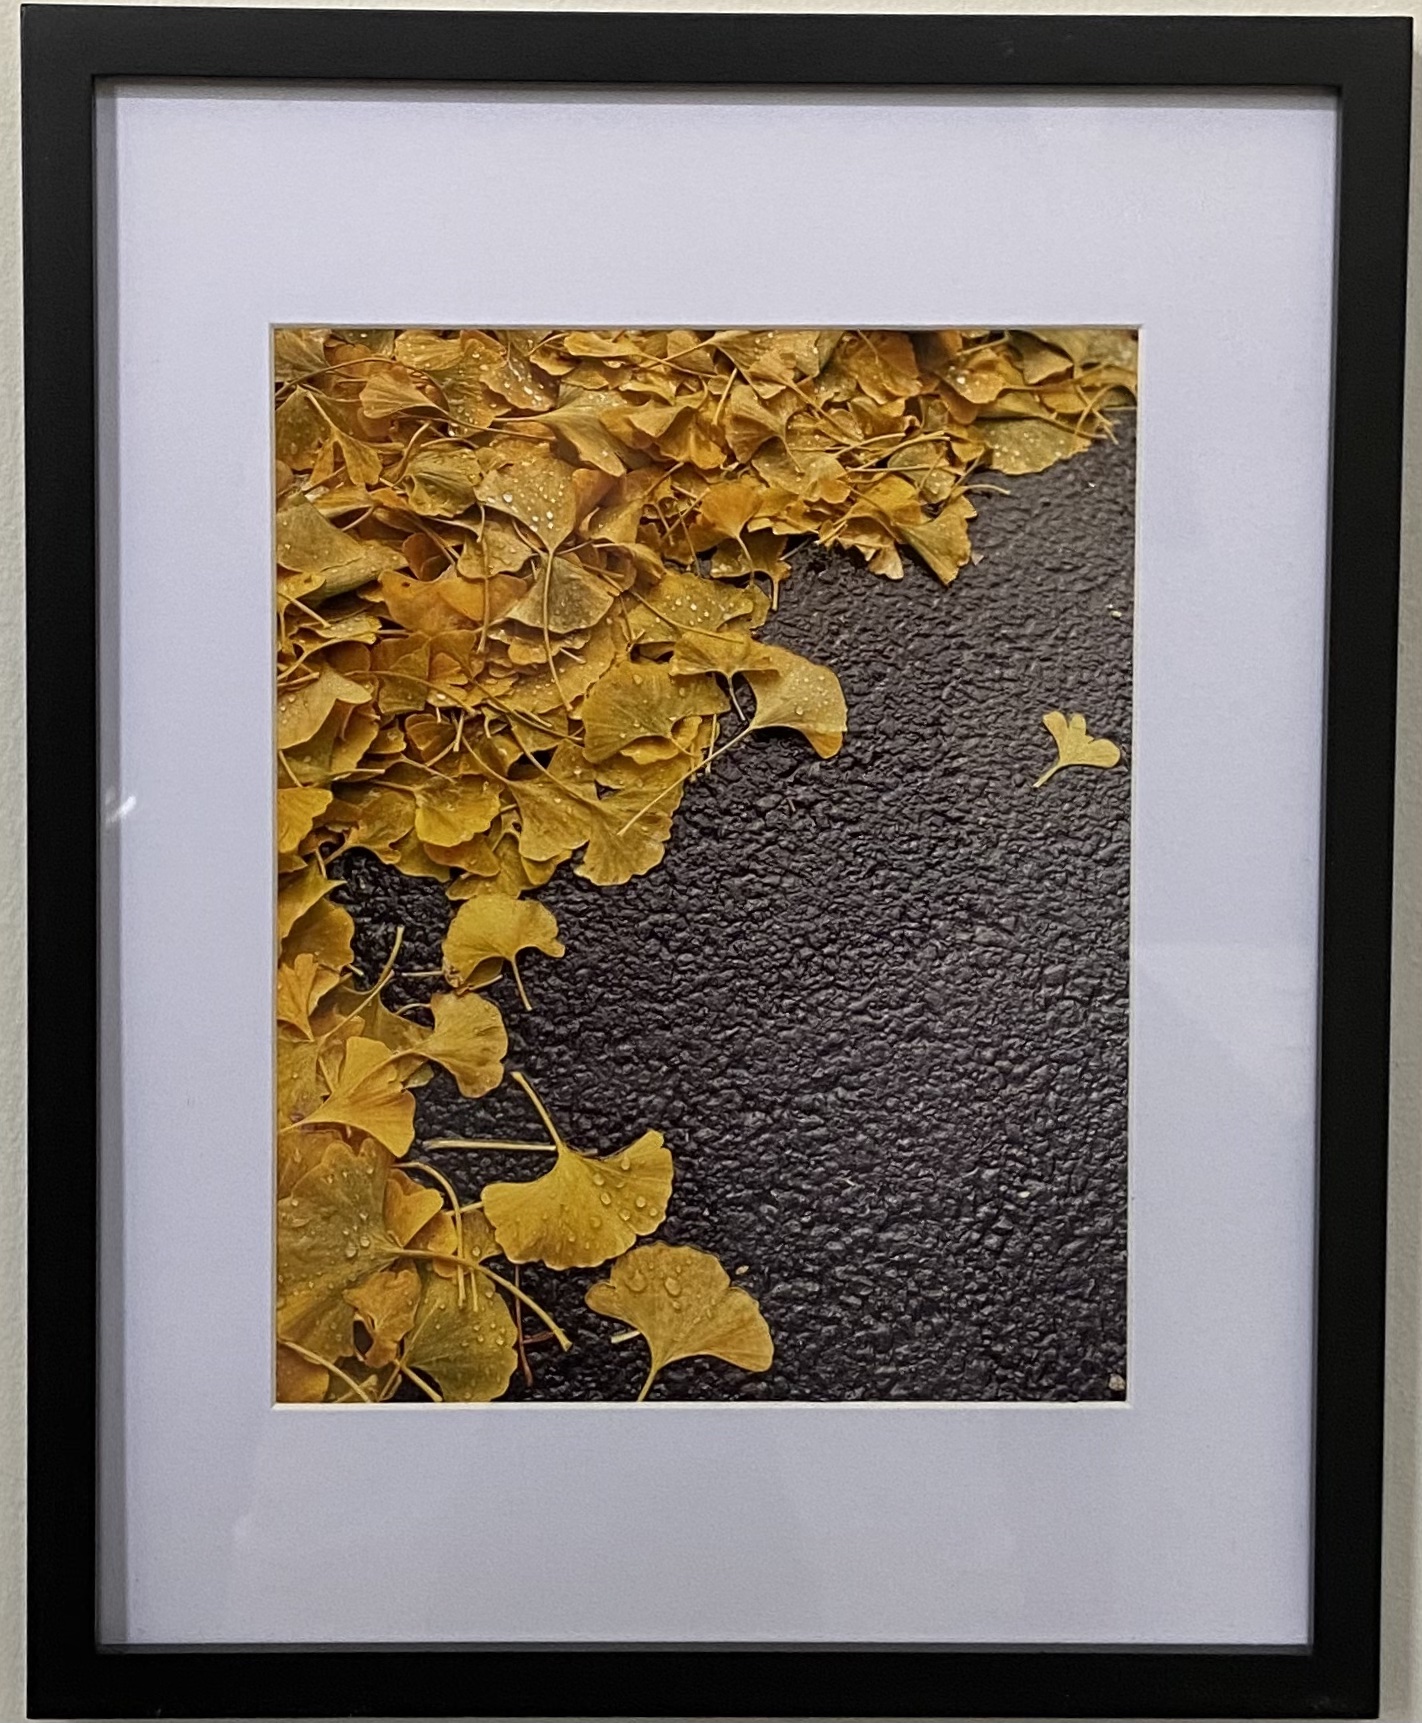 Ginko Leaves
Photography
8" X 10"
$95.